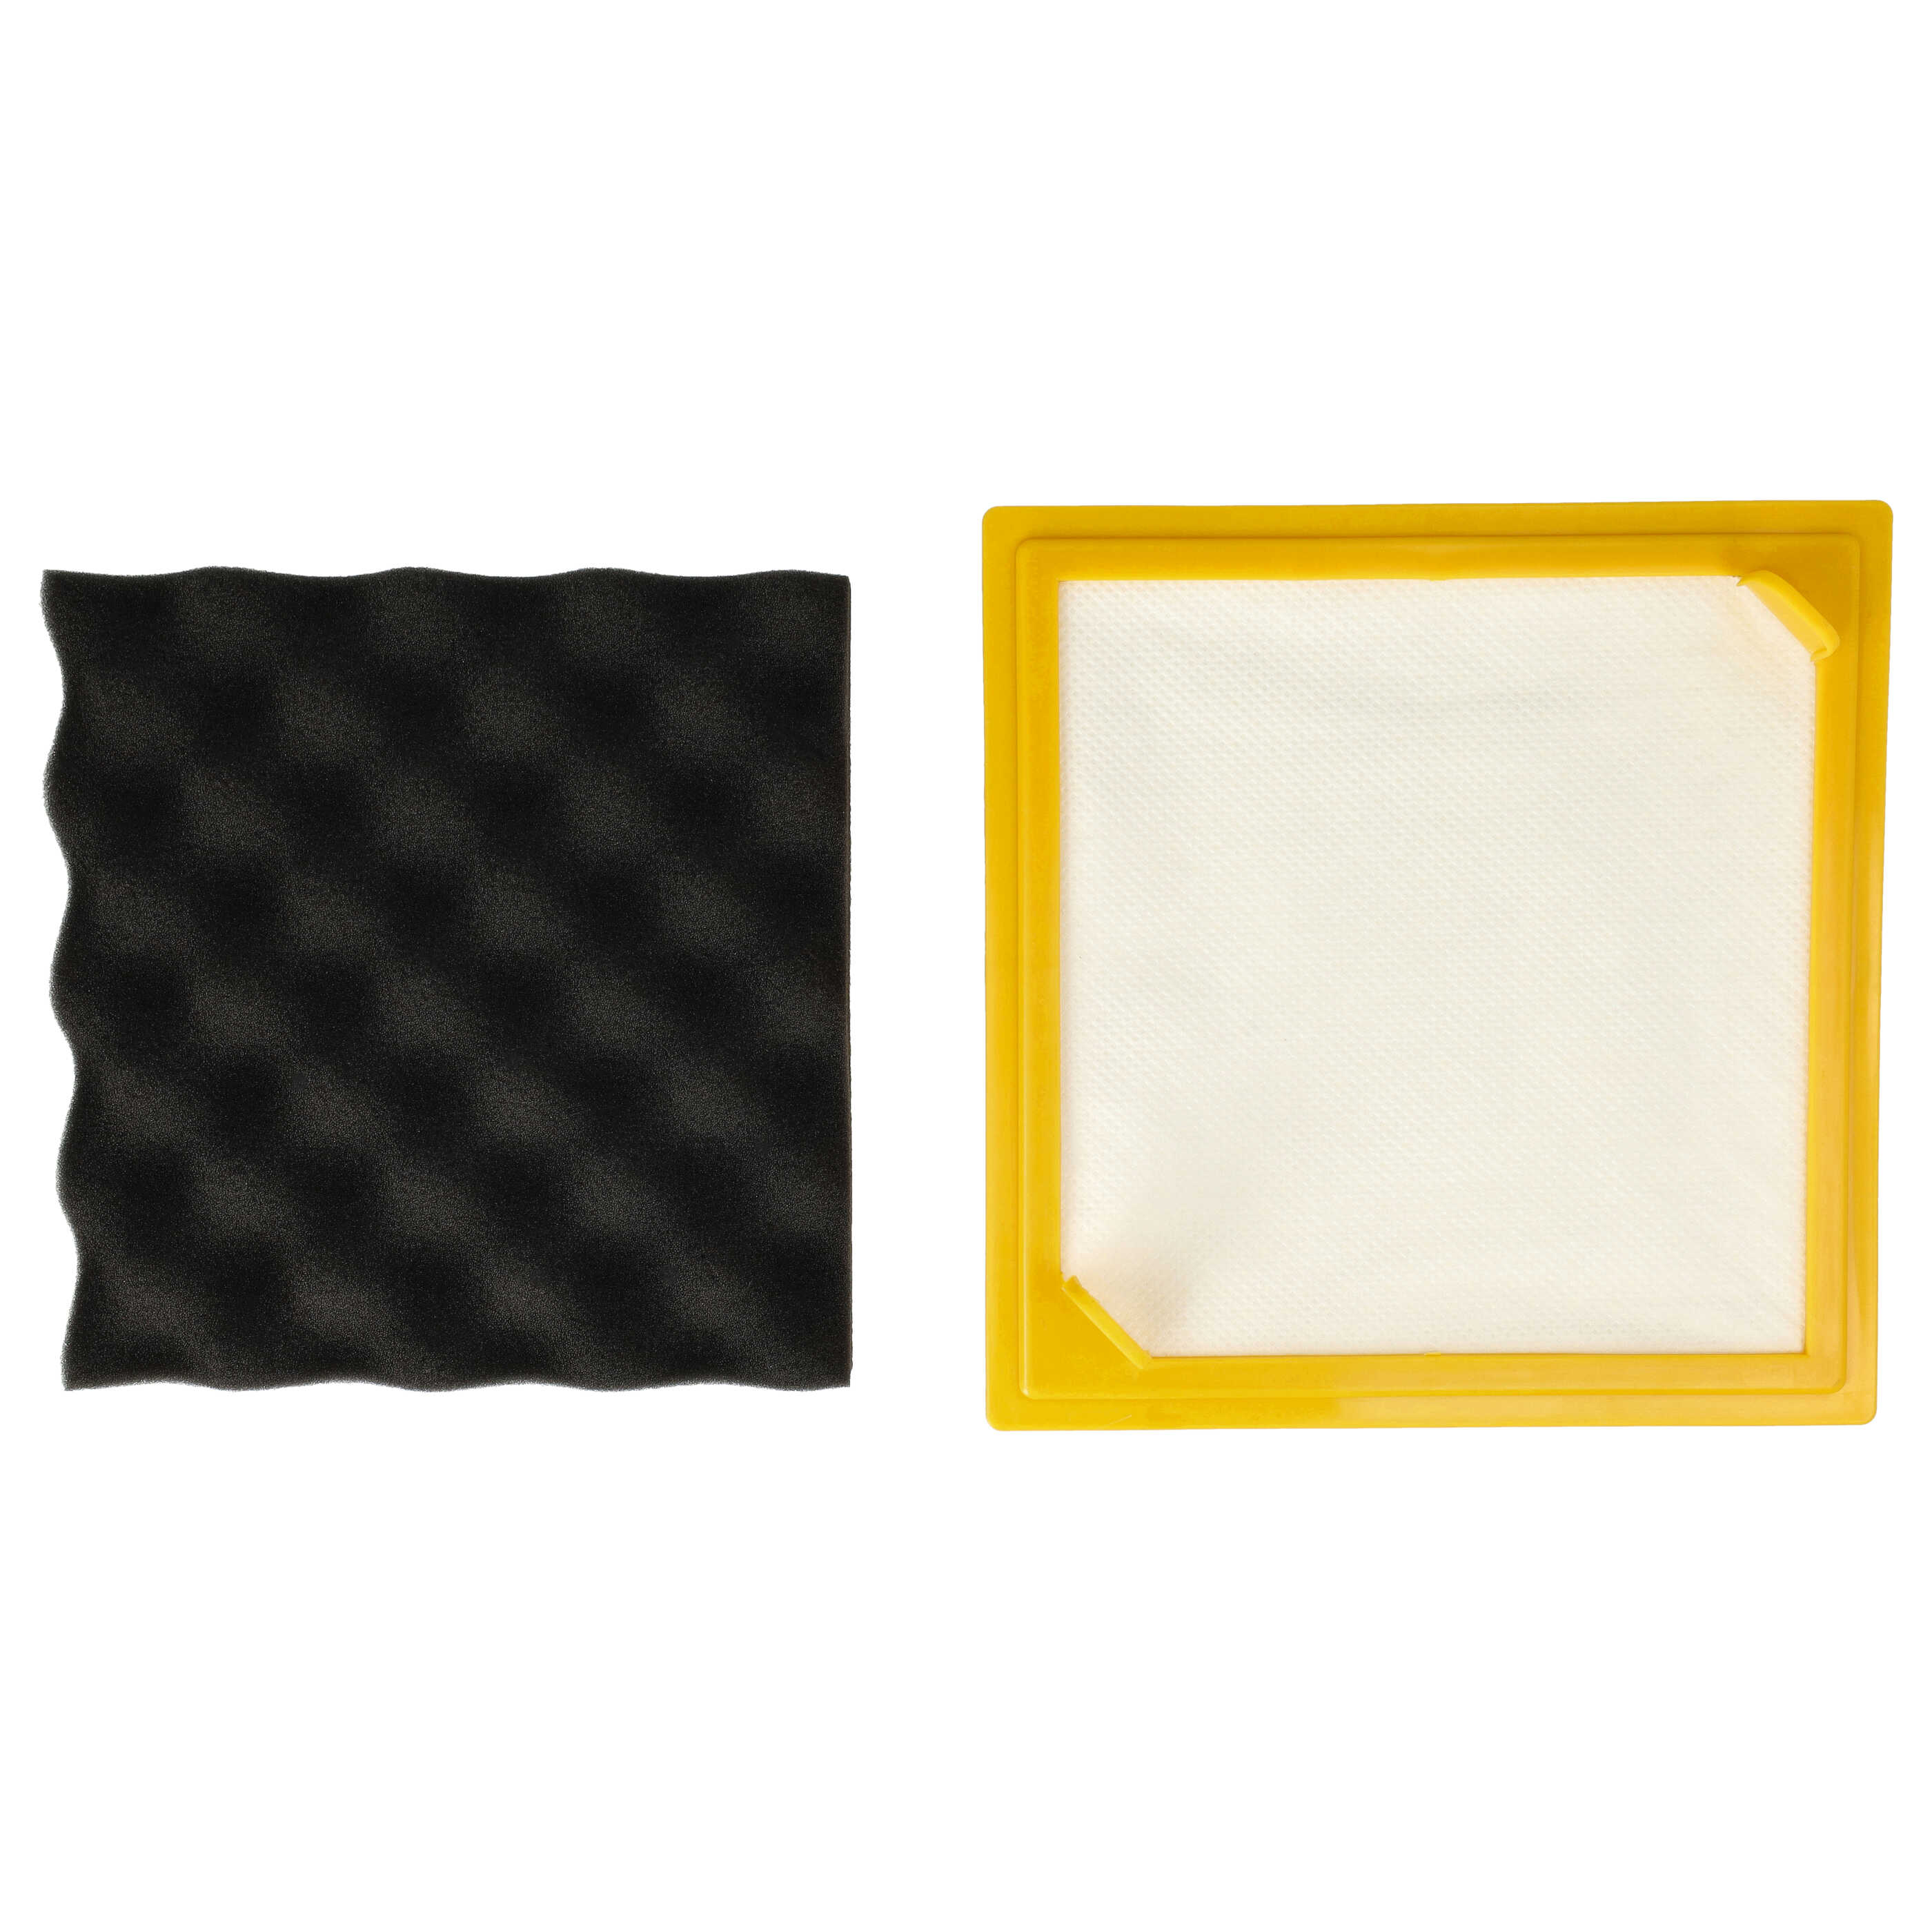 1x HEPA filter replaces Hoover 04365029, 04365062, T70 for Hoover Vacuum Cleaner